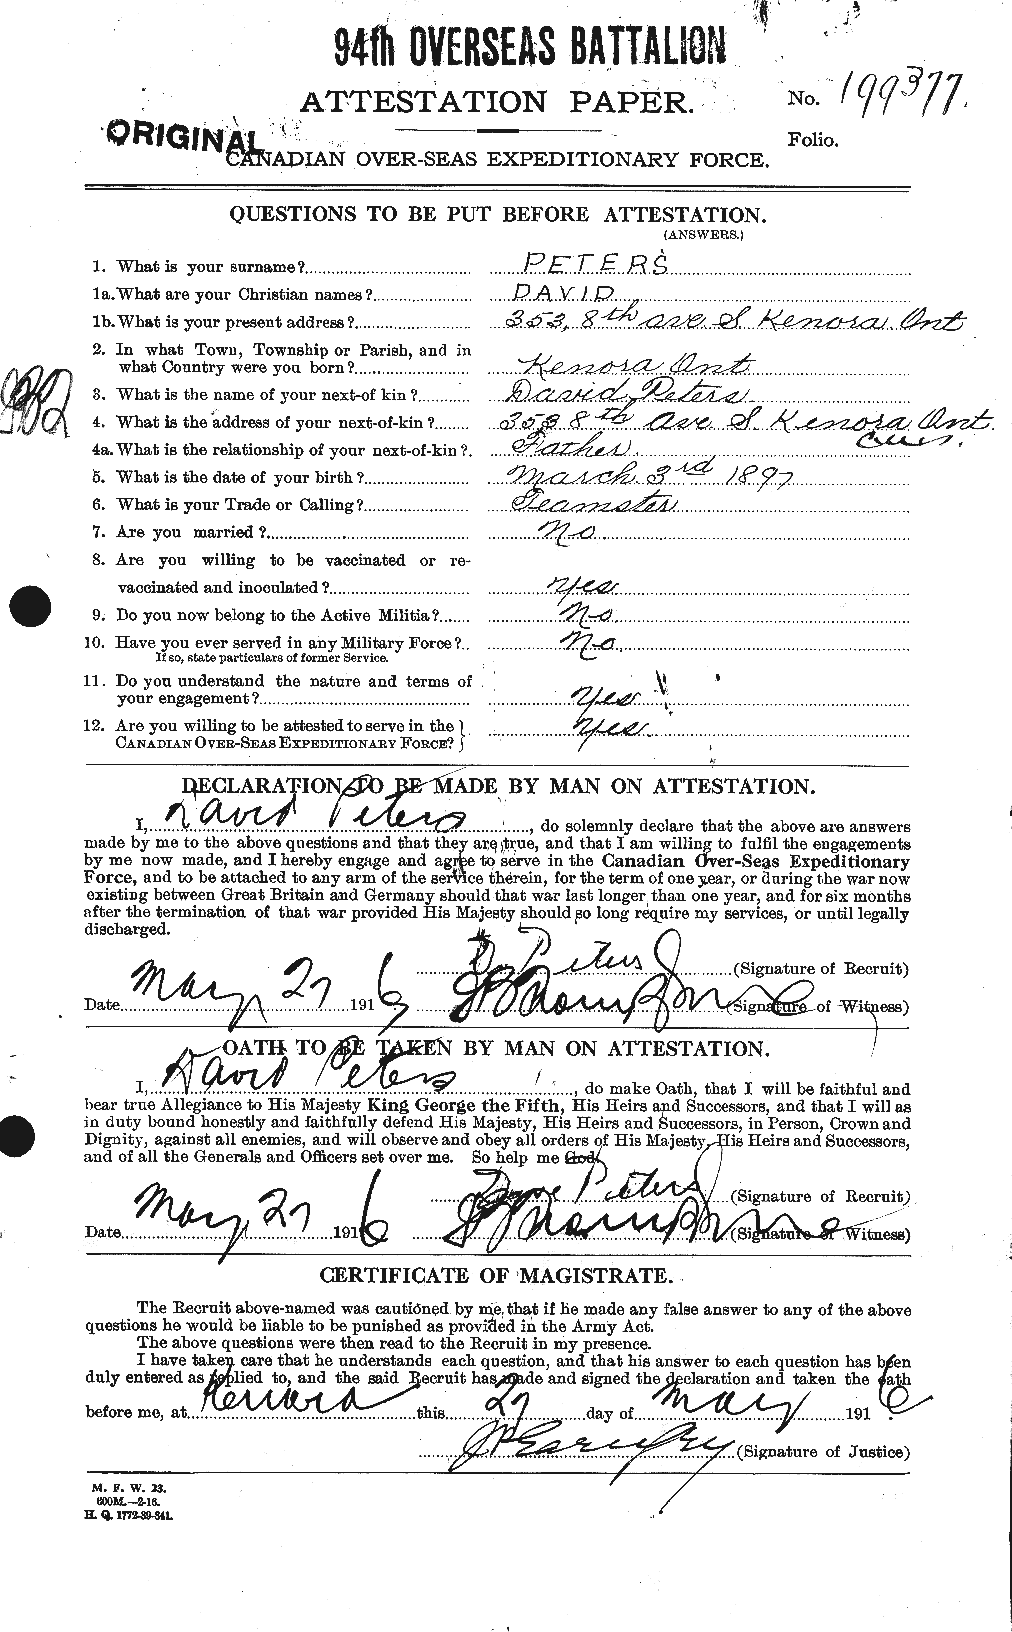 Personnel Records of the First World War - CEF 575387a